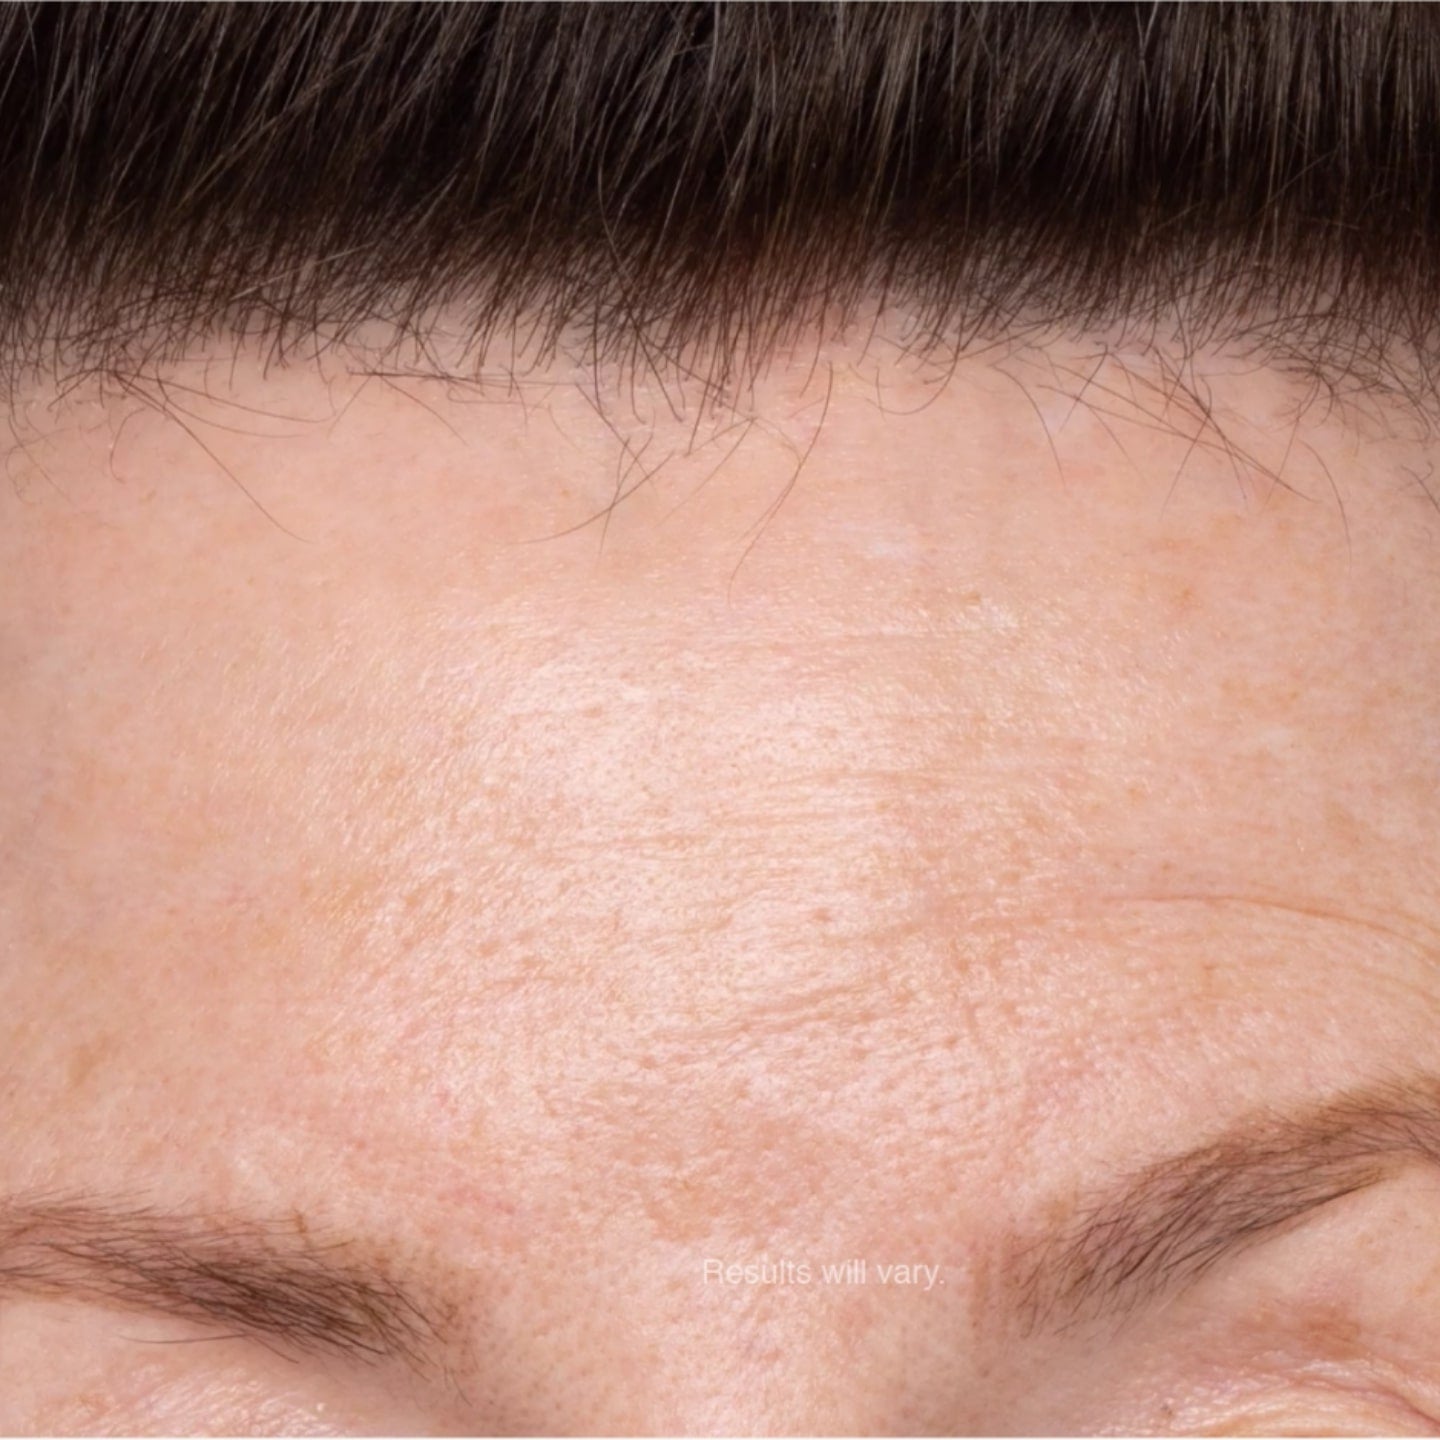 Close up photo of a woman's forehead